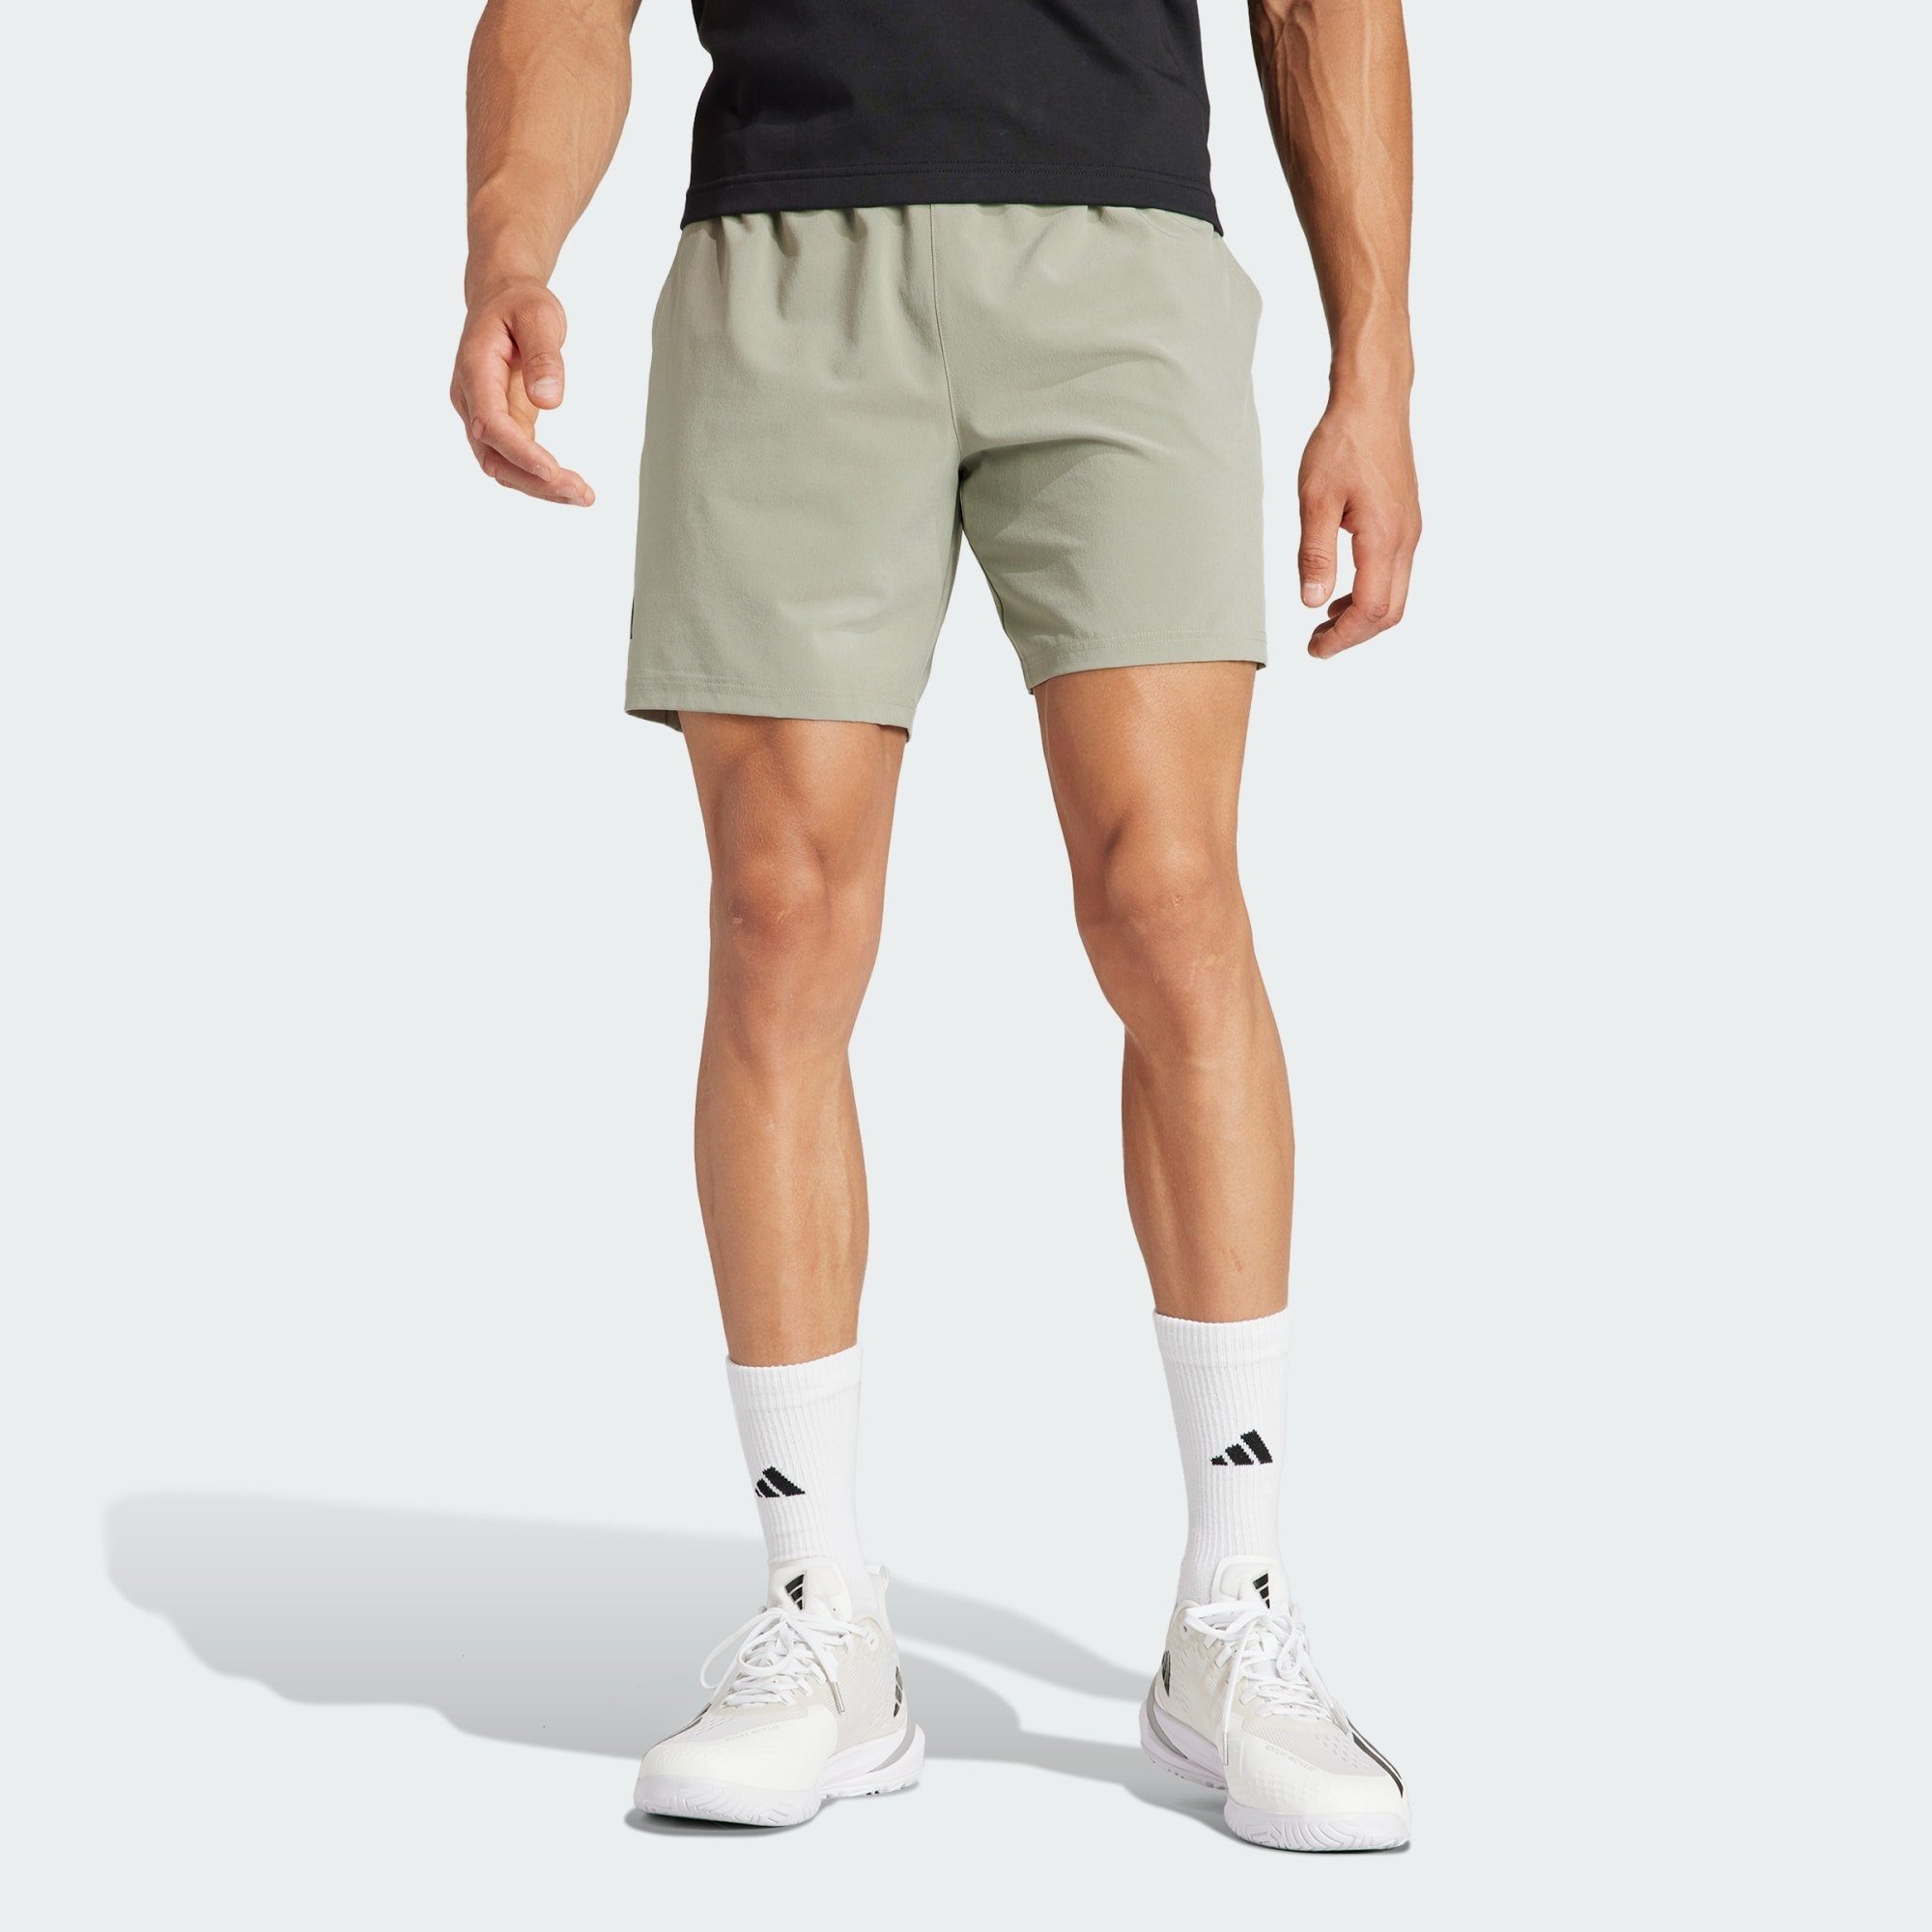 Funktionsshorts Silver CLUB adidas TENNIS Performance WOVEN SHORTS STRETCH Pebble